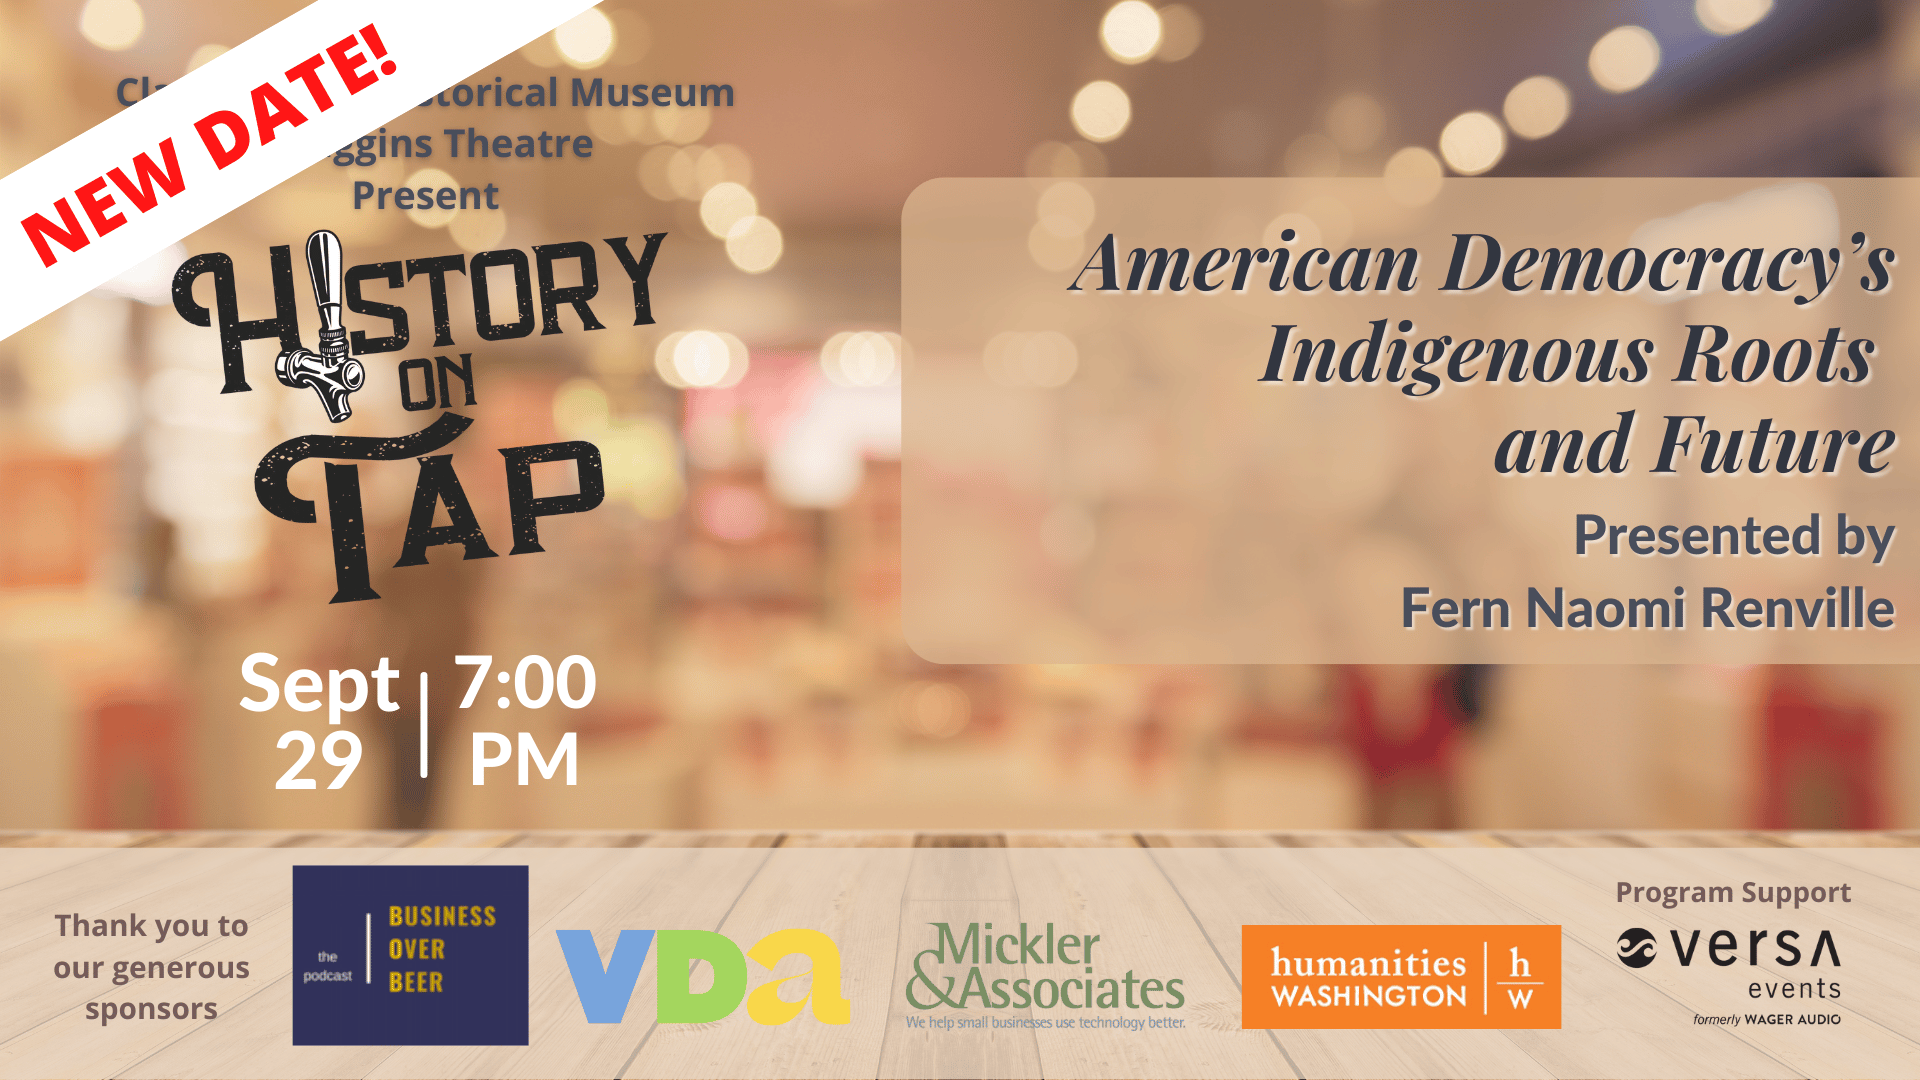 History on Tap Sep 29 7 pm